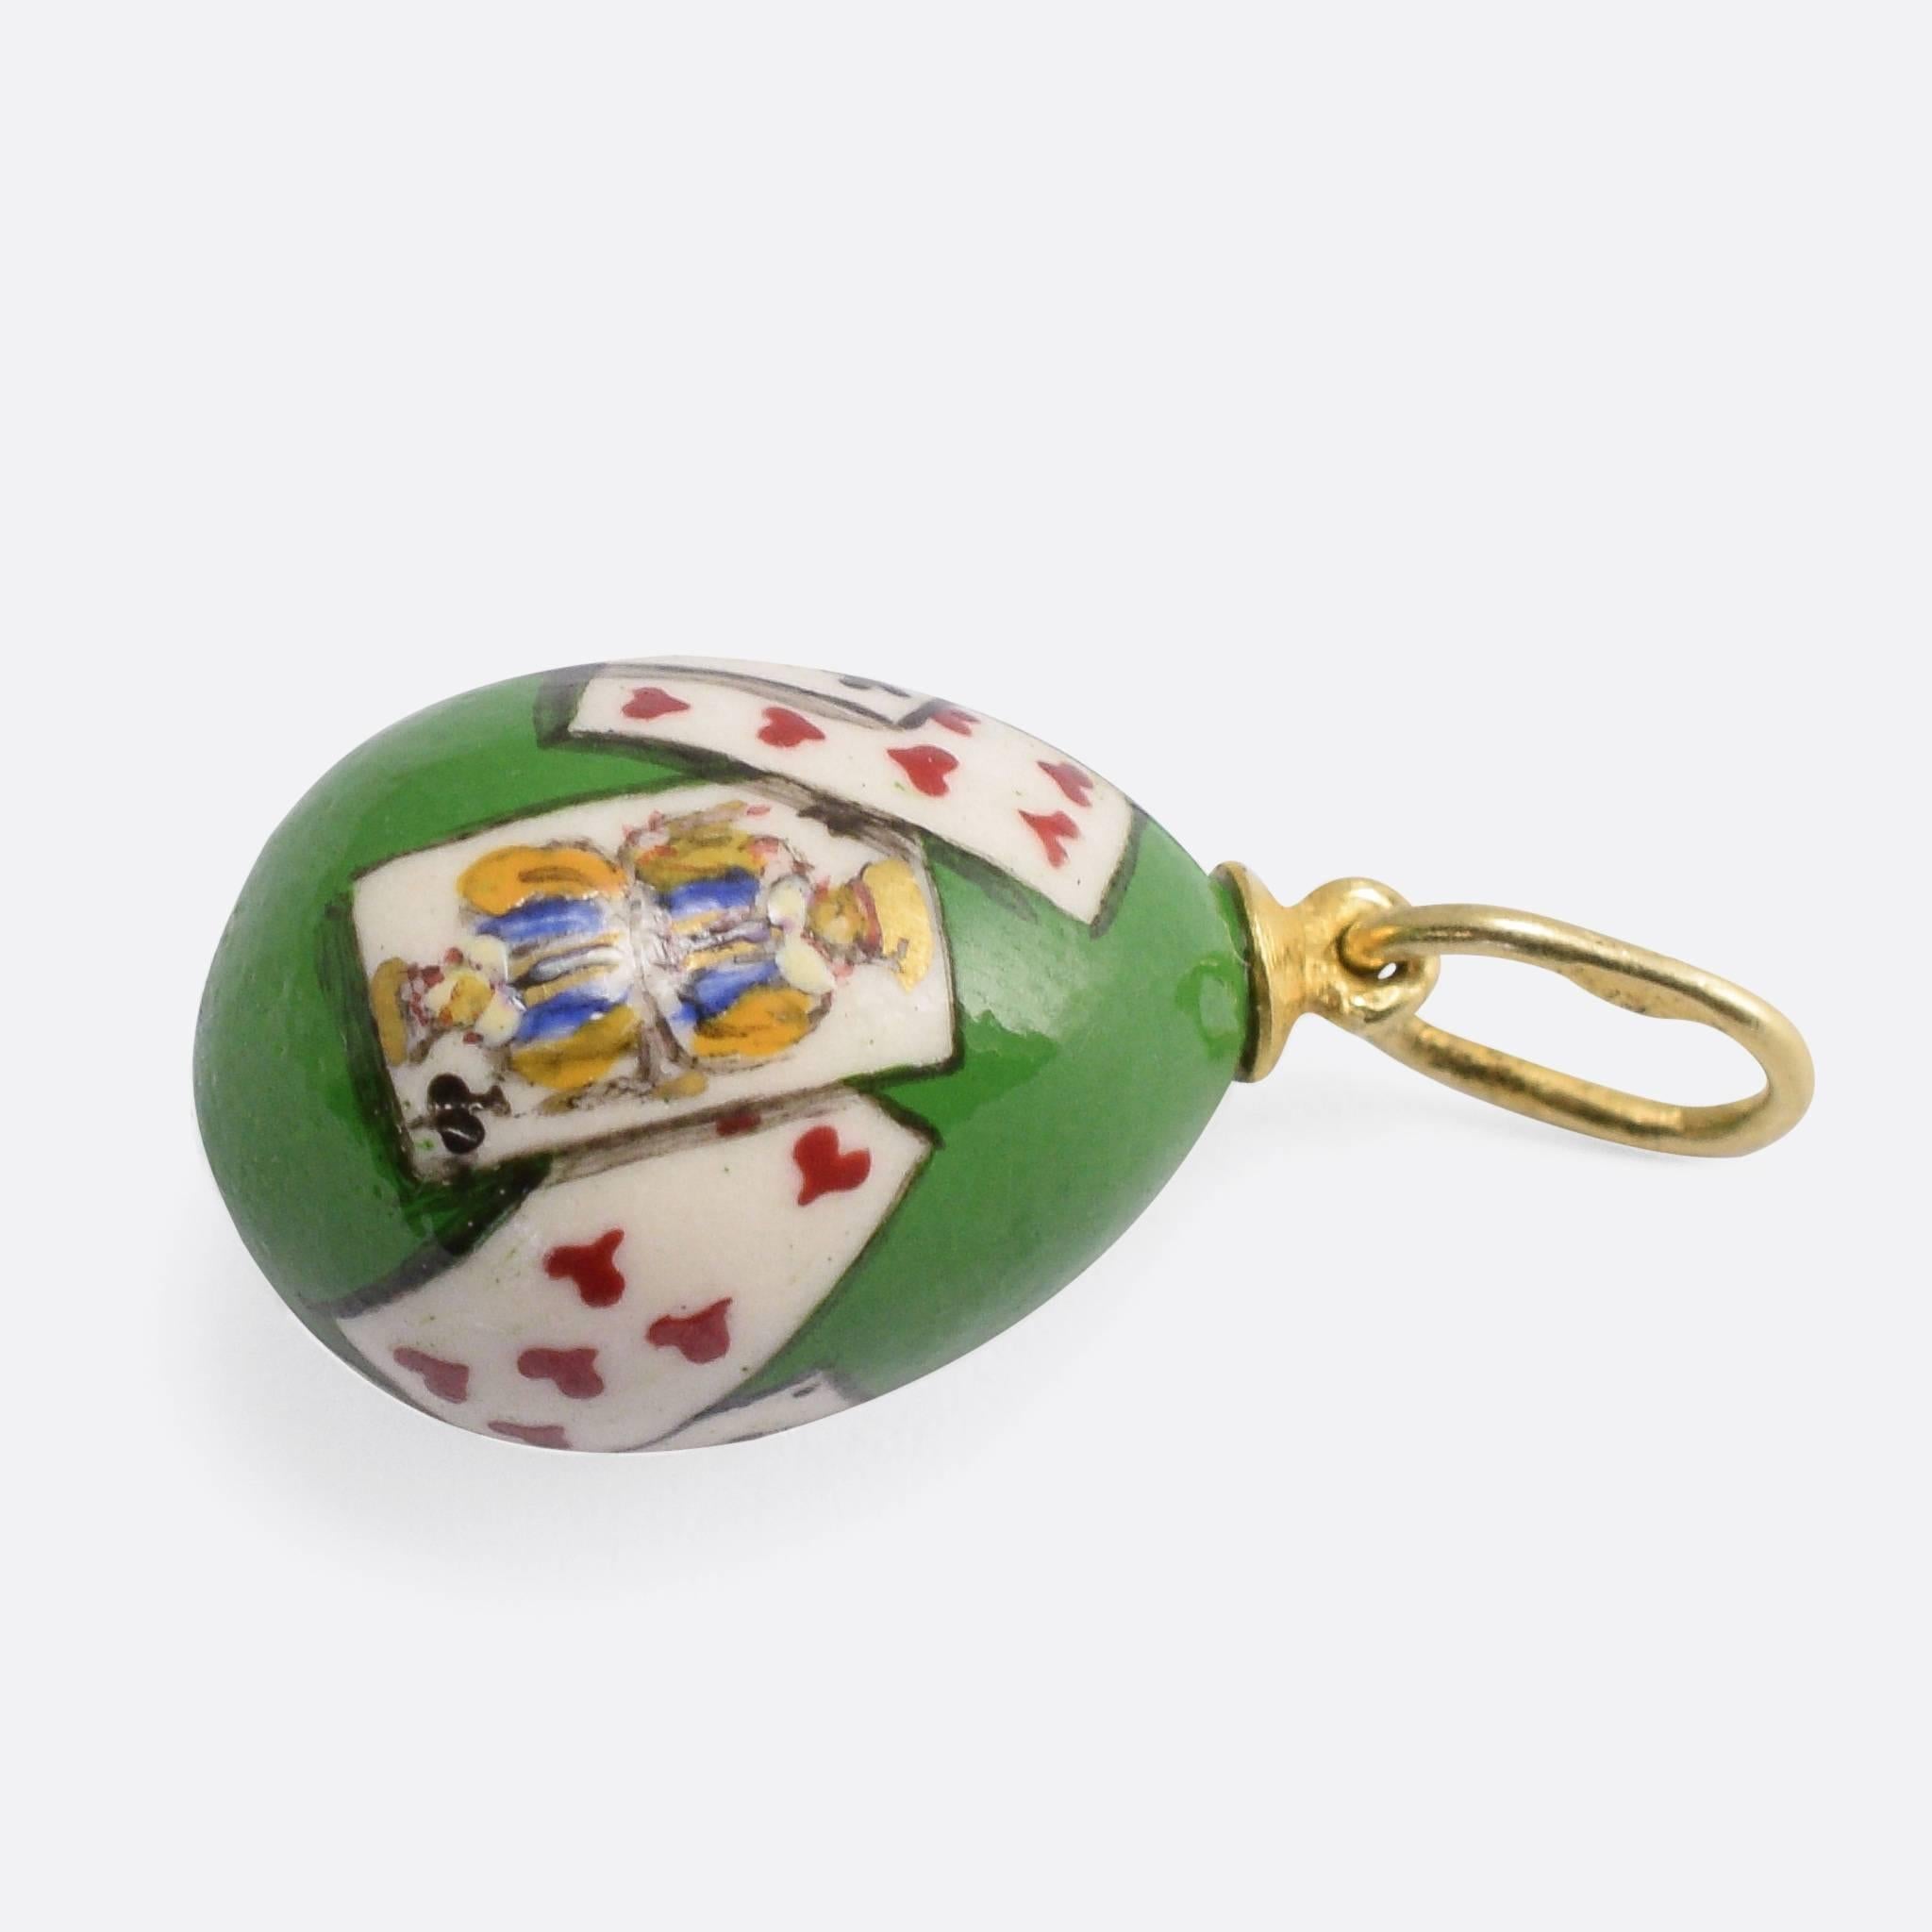 A charming antique miniature egg pendant, with beautiful enamelling that depicts playing cards - including the King and Queen of Spades - on a green background. A wonderful example of the style, featuring the exquisite Russian craftsmanship we would